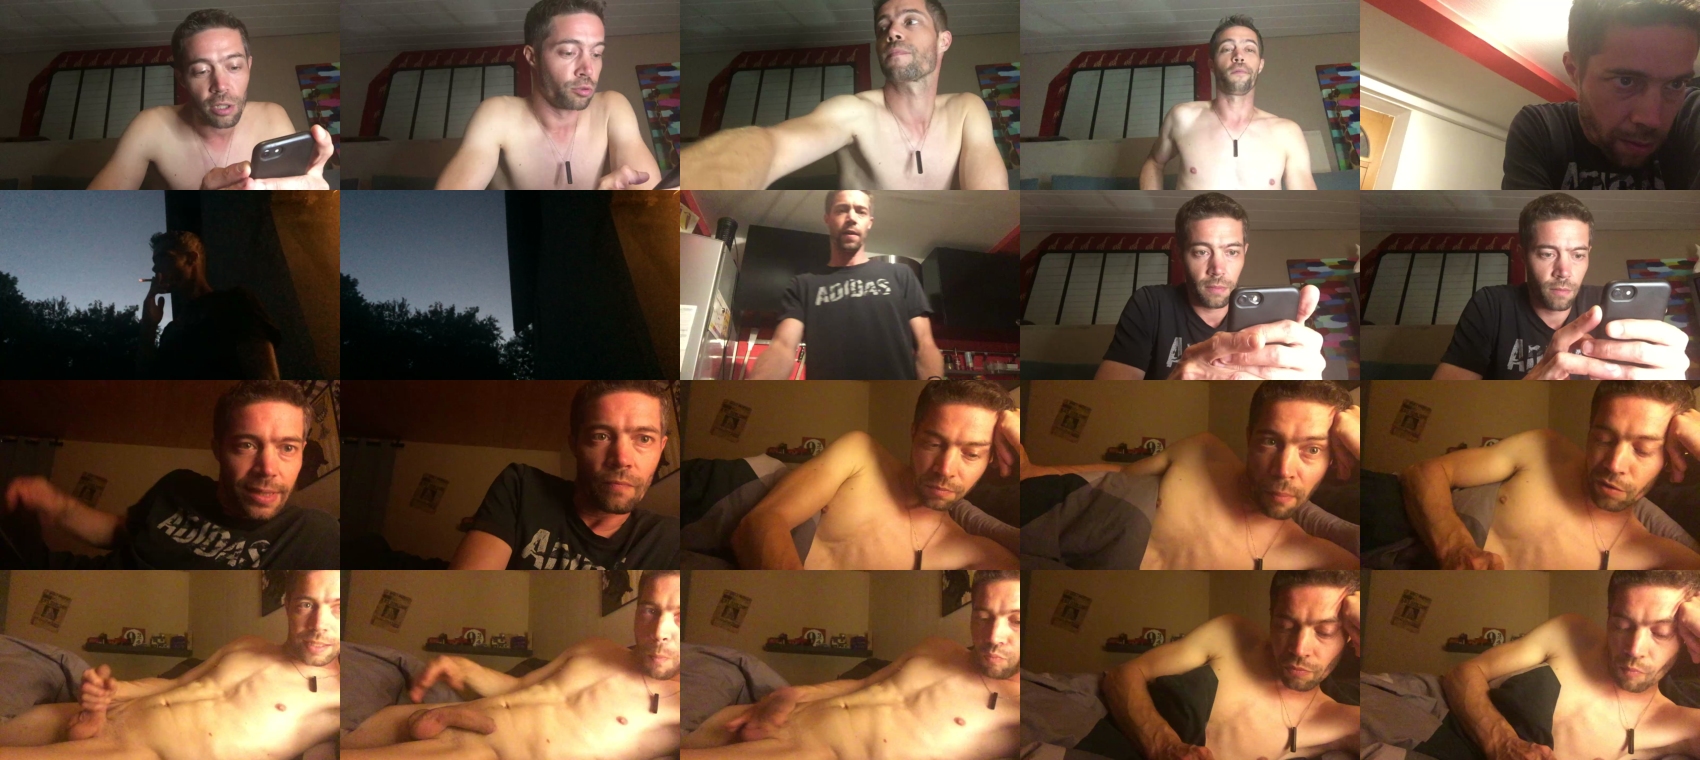 BSBB1870  27-06-2022 Recorded Video play